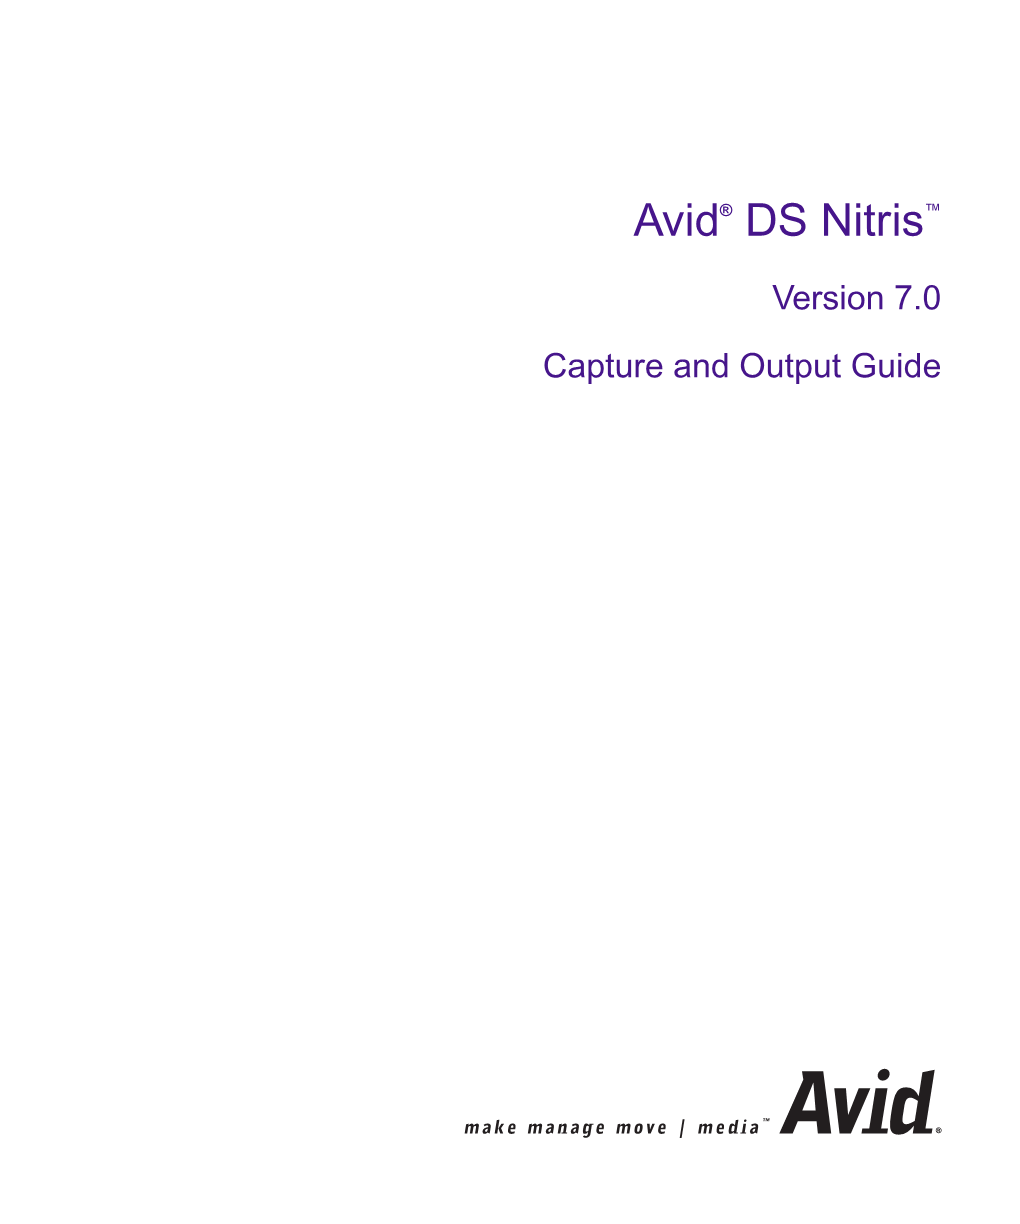 Avid DS Nitris Capture and Output Guide • 0130-05574-01 • September 2003